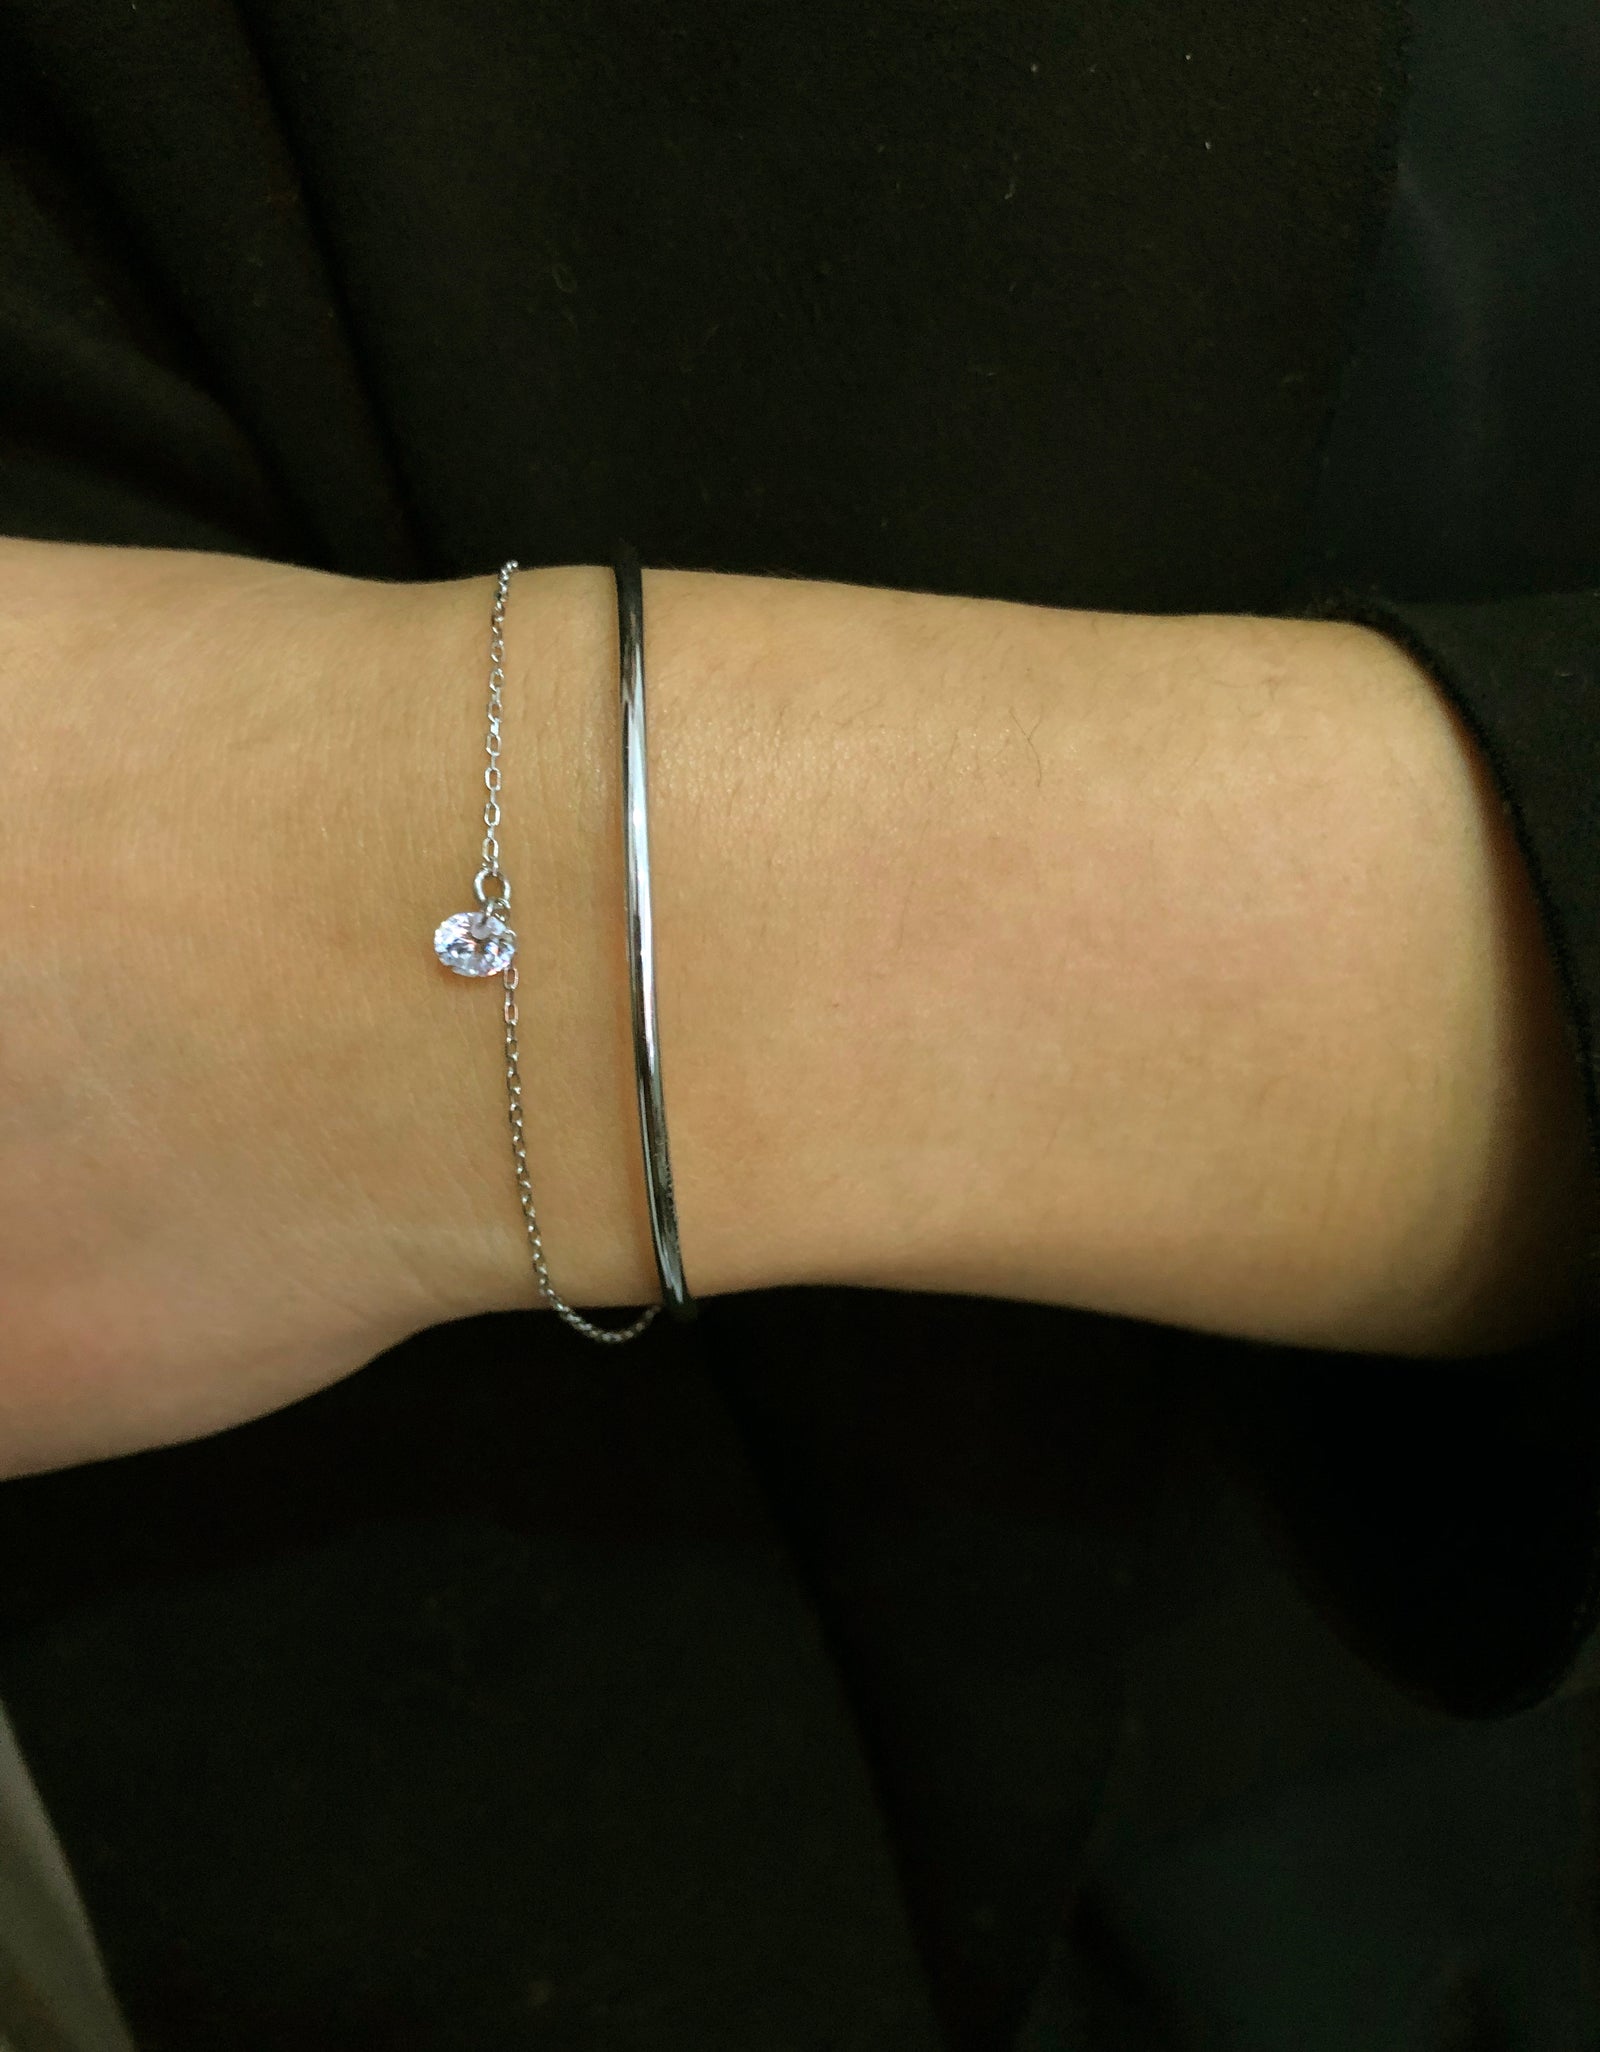 Silver Cuff Bracelet with Chain and Hanging Stone